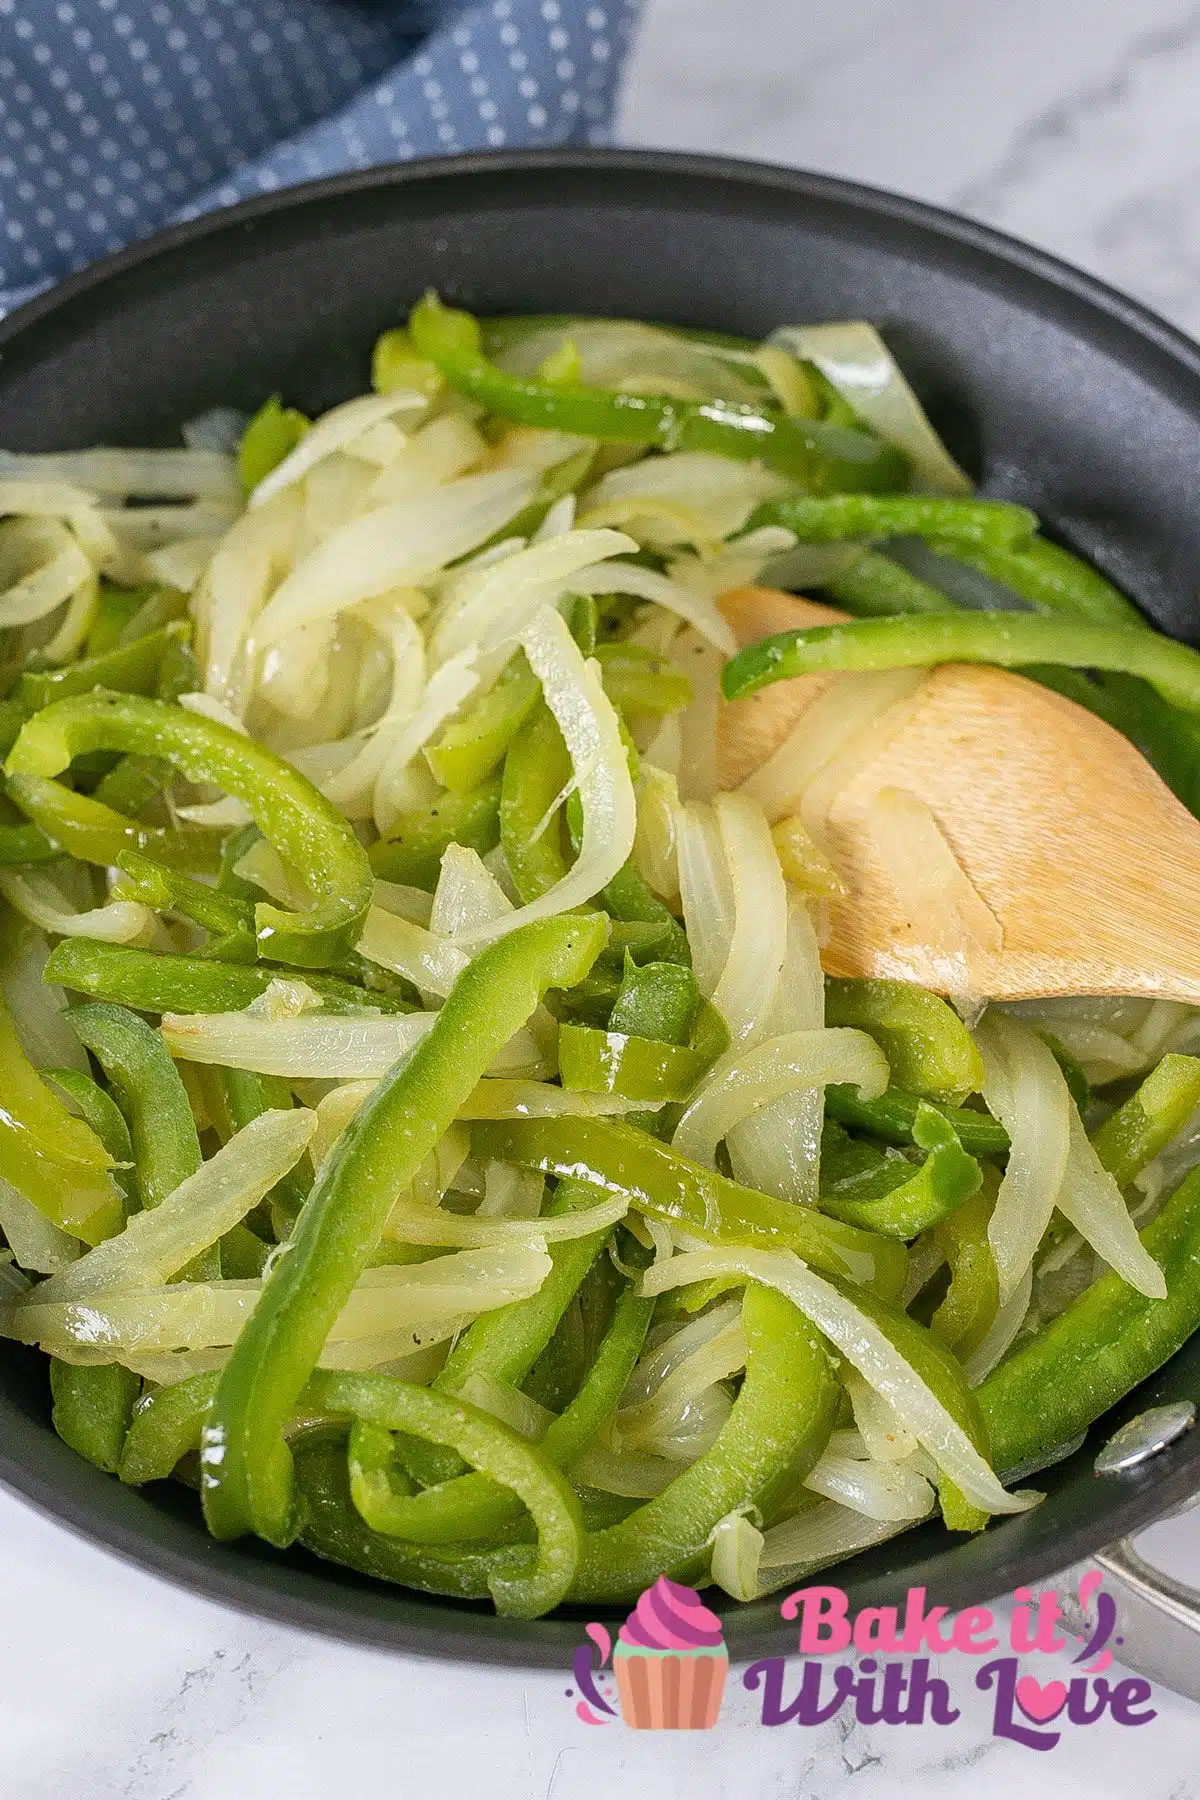 Tall image of sauteed peppers and onions in a skillet with a wooden spoon.